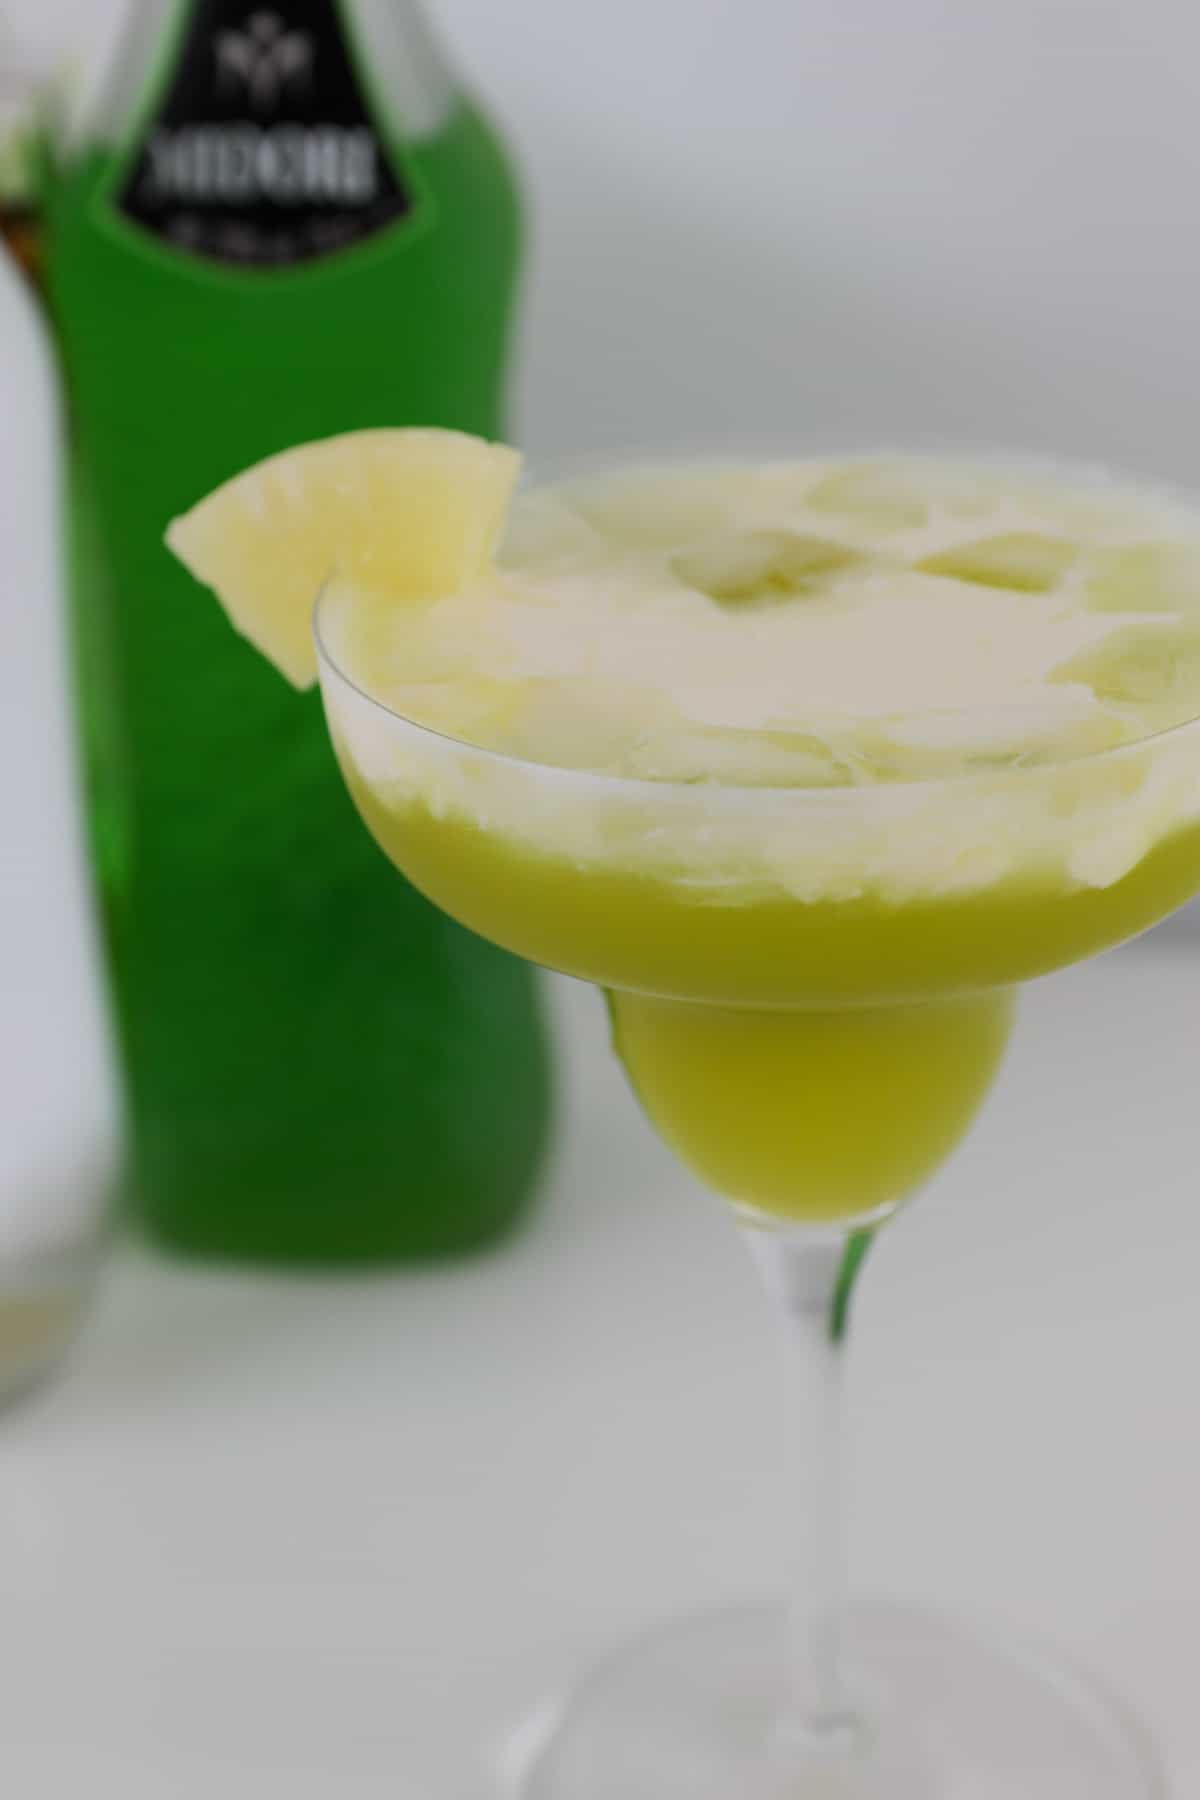 A pineapple slice garnishing a pine lime cocktail.